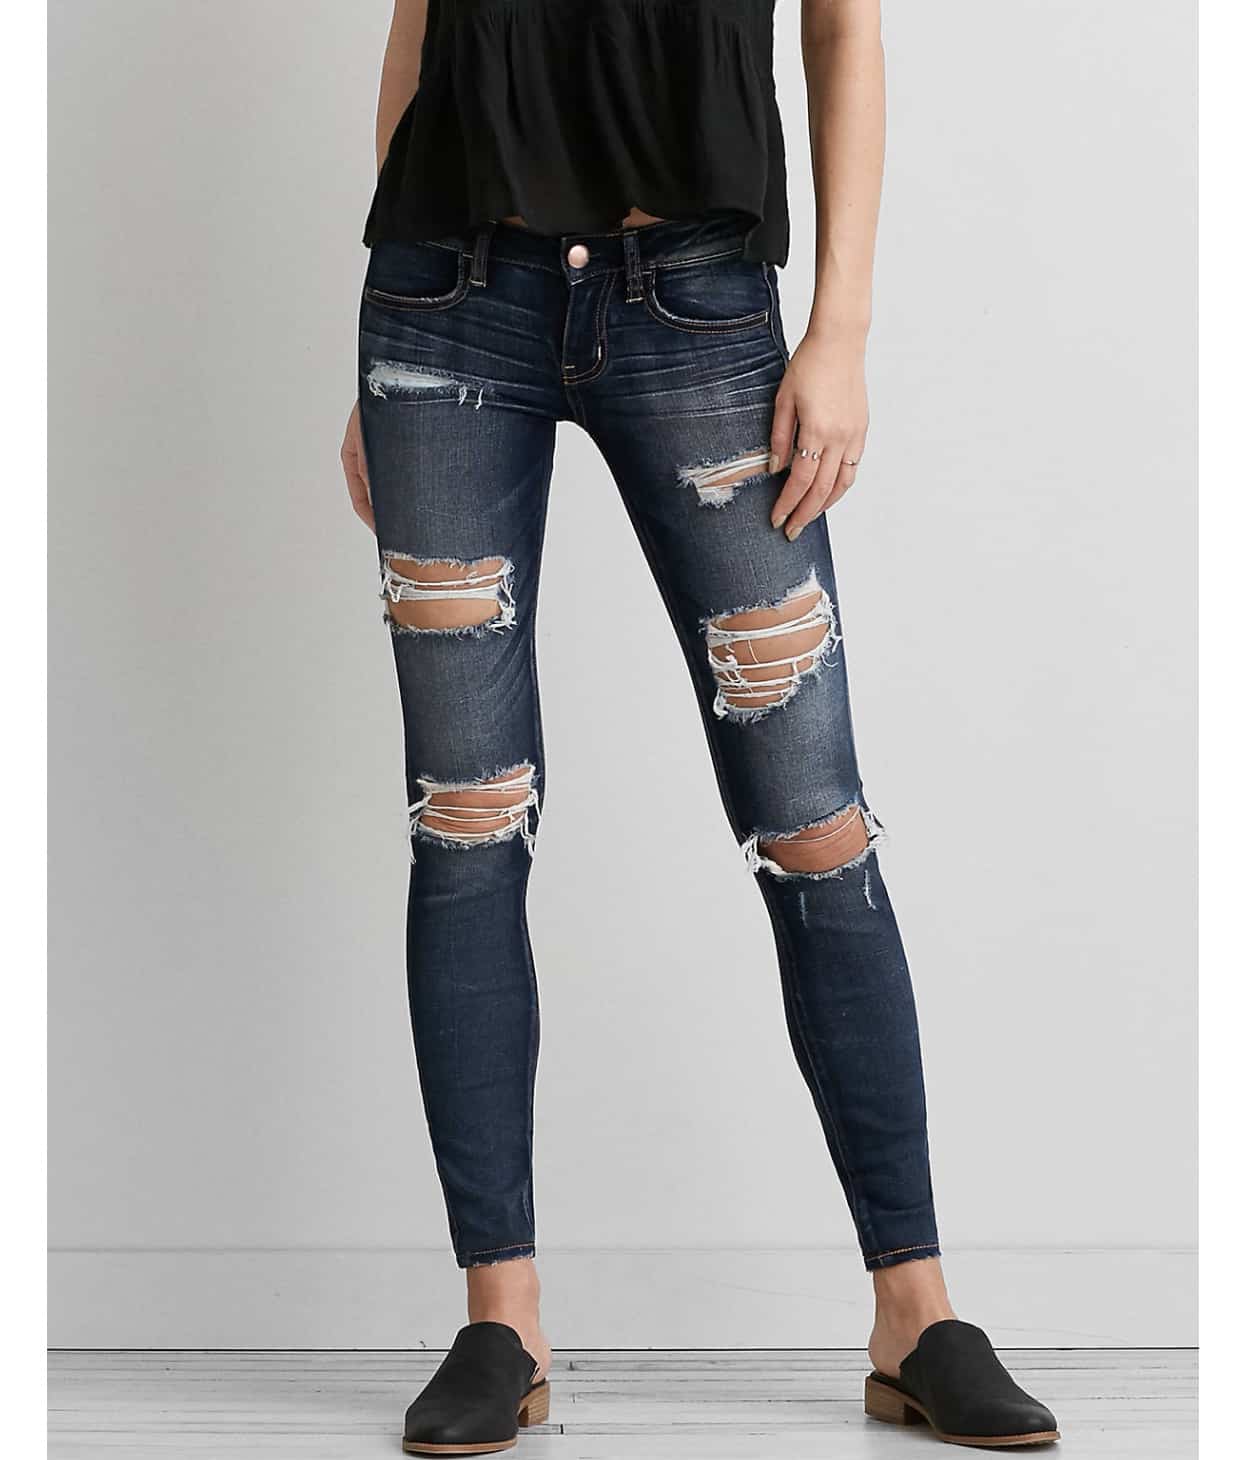 american eagle tommy girl jeans